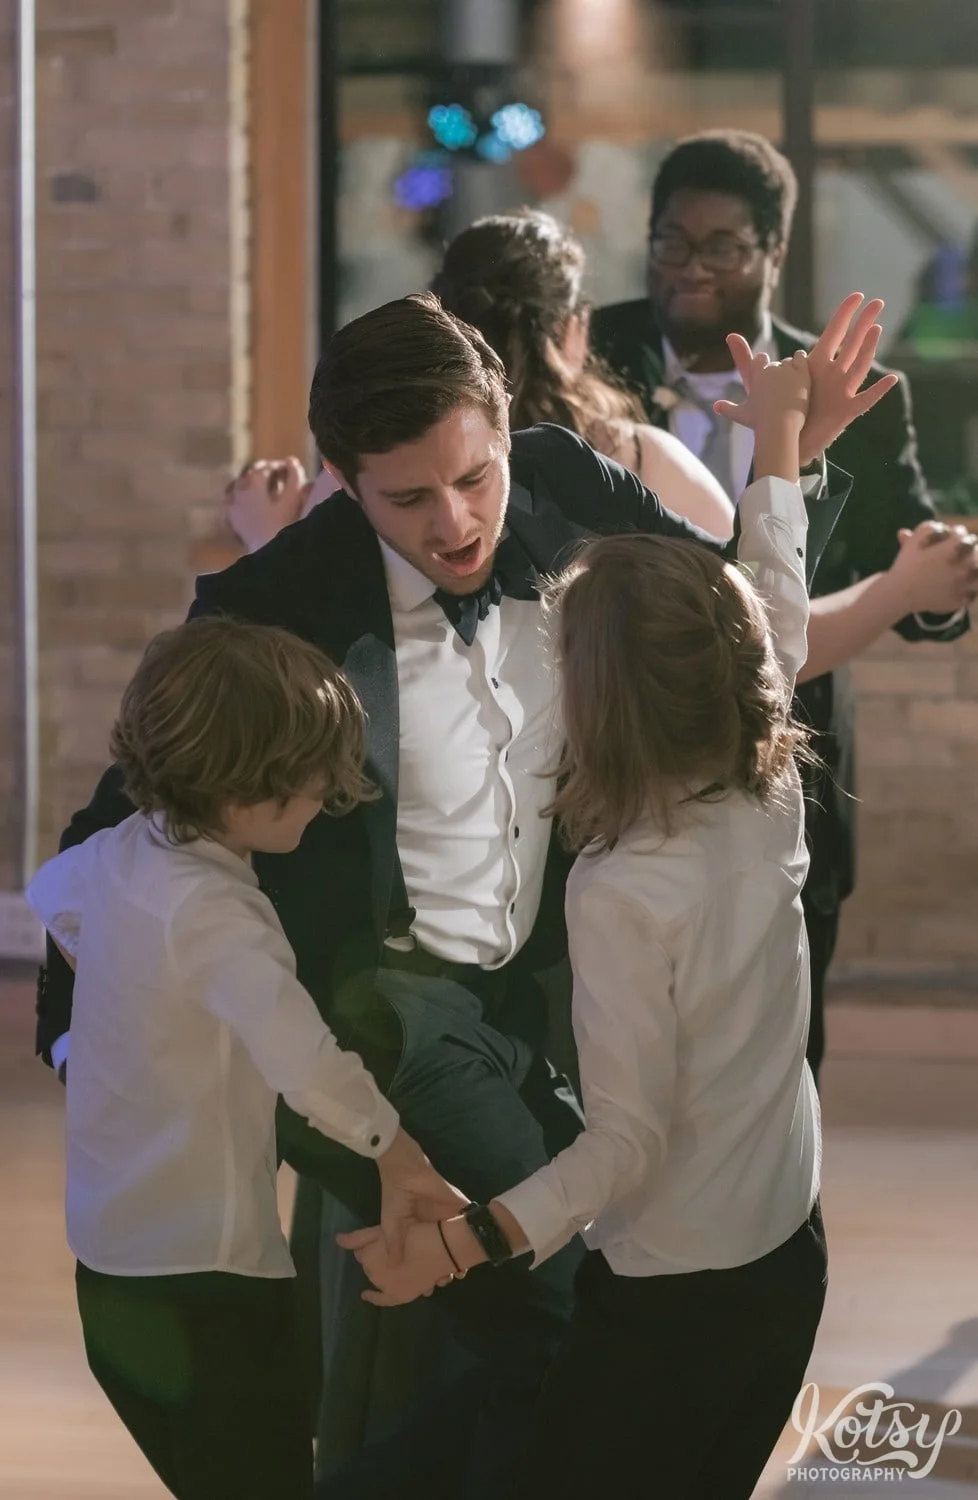 A man in a black suit and black bow tie dances with two children in white dress shirts during a Second Floor Events wedding reception in Toronto, Canada.